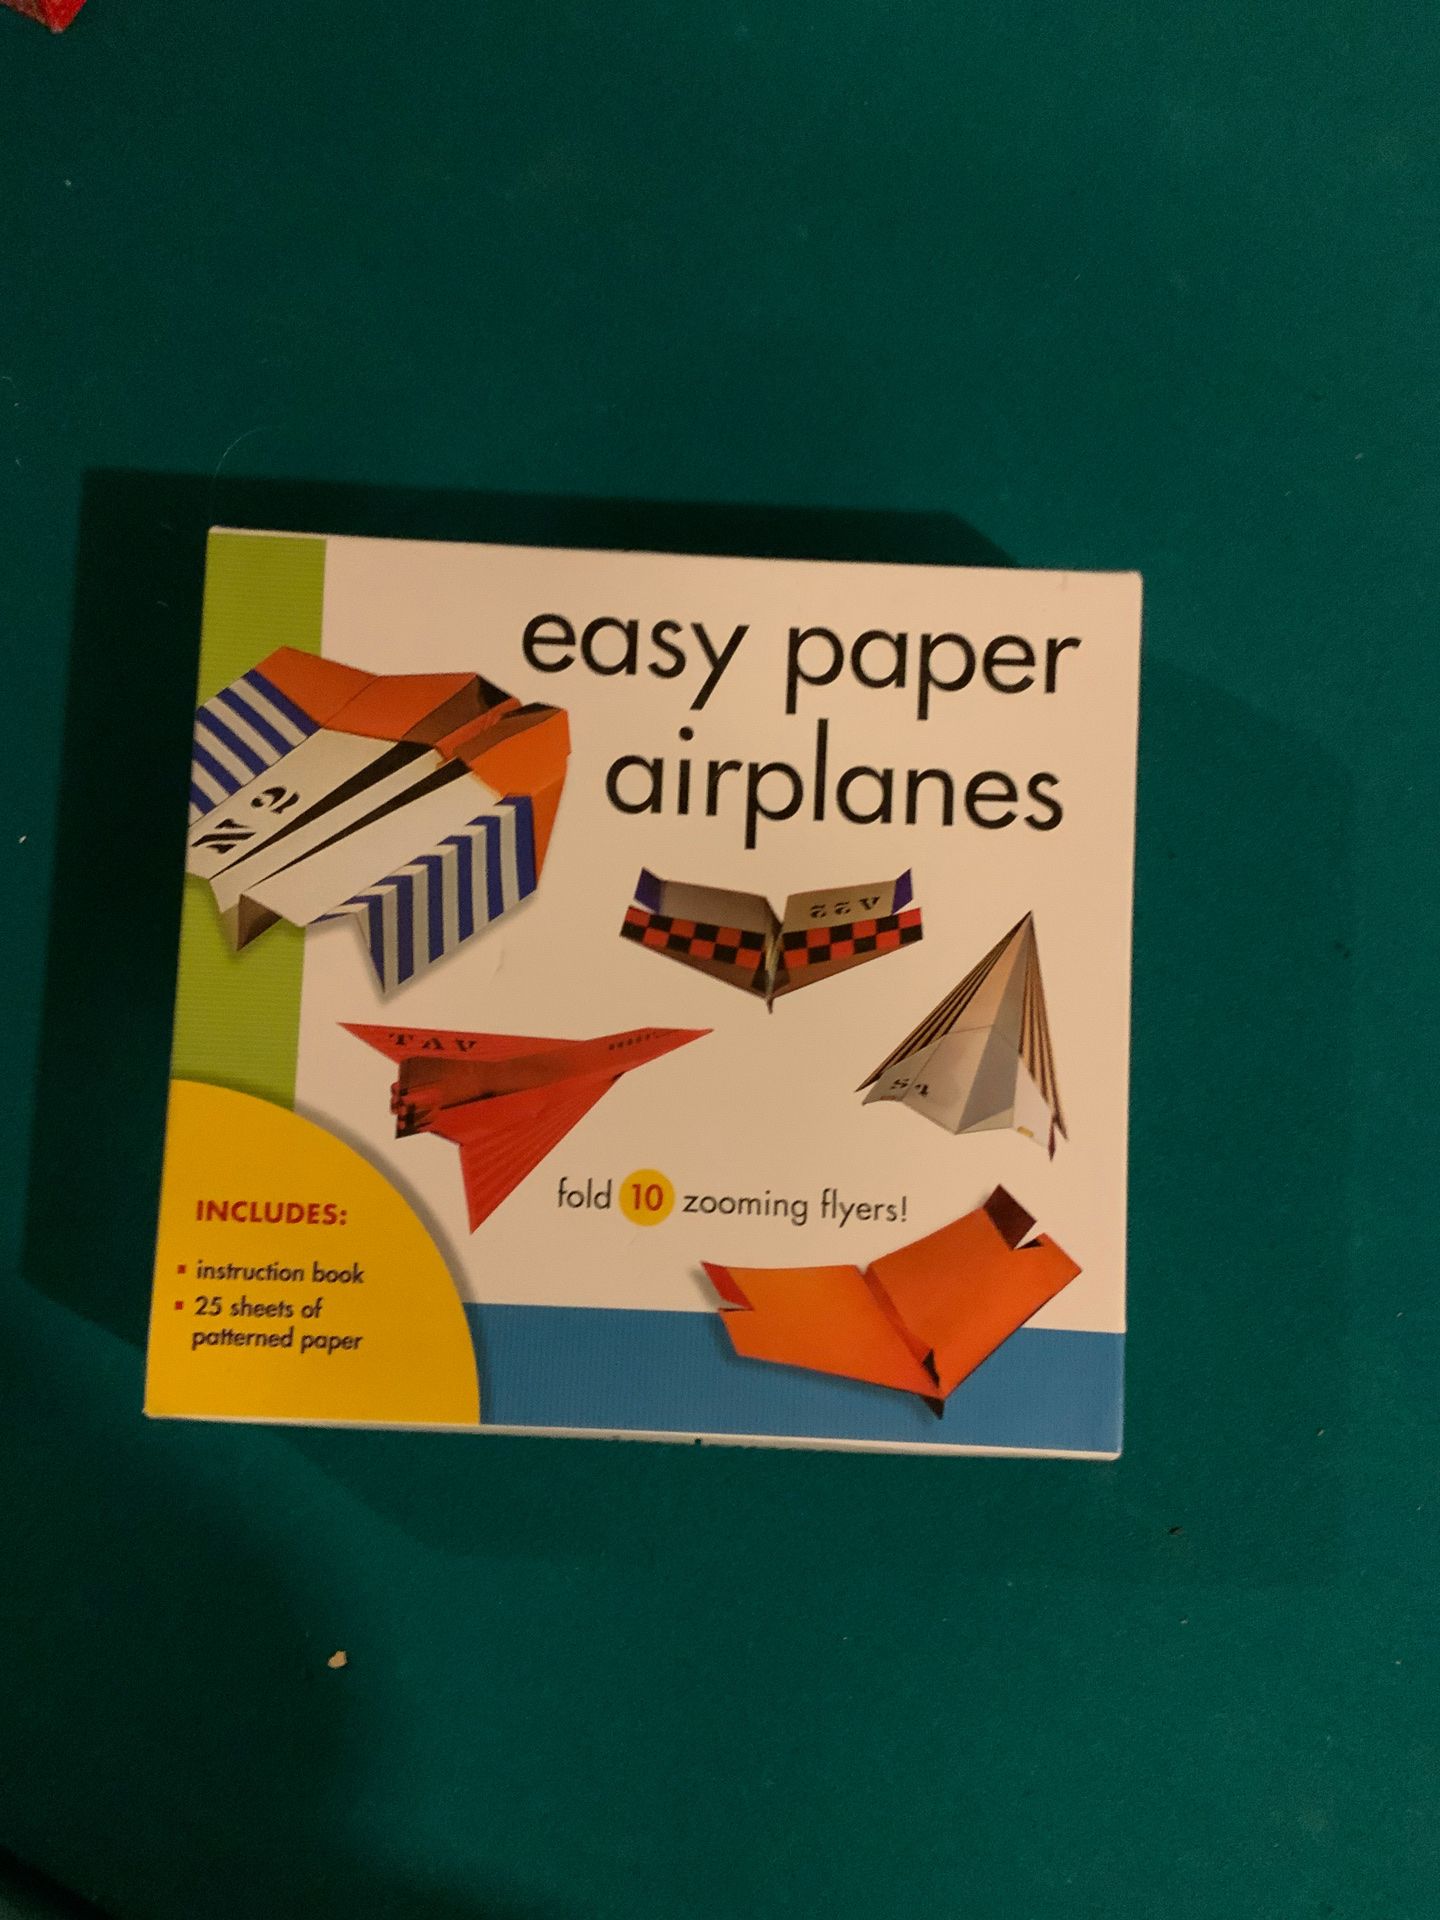 Easy paper airplane kit